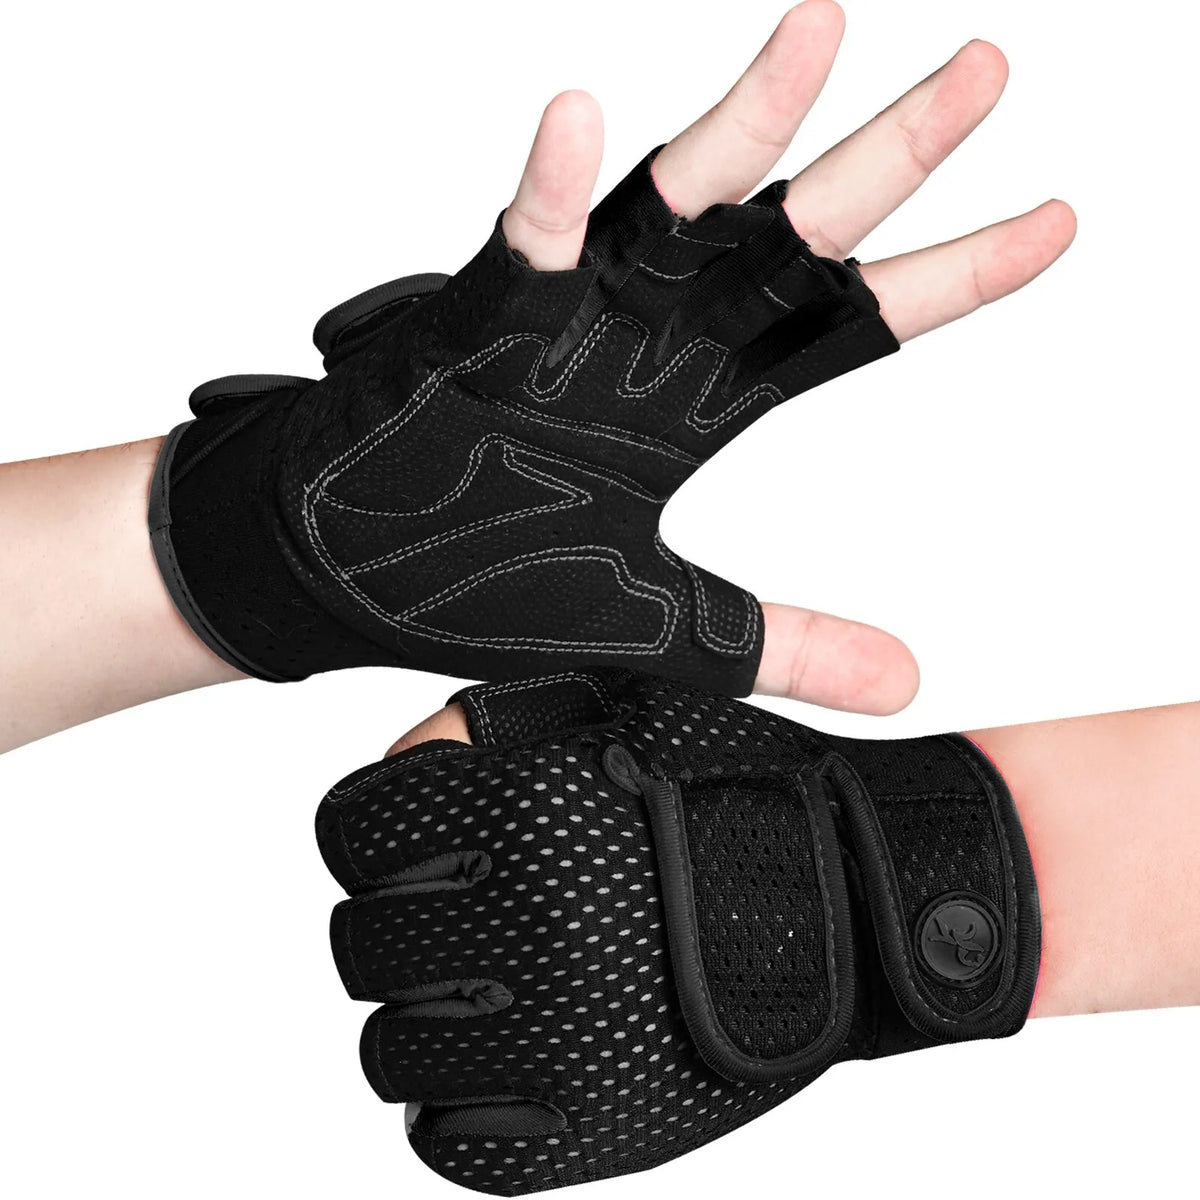 Wrist Support Exercise Fitness Gloves for Training,Pull Ups,Rowing